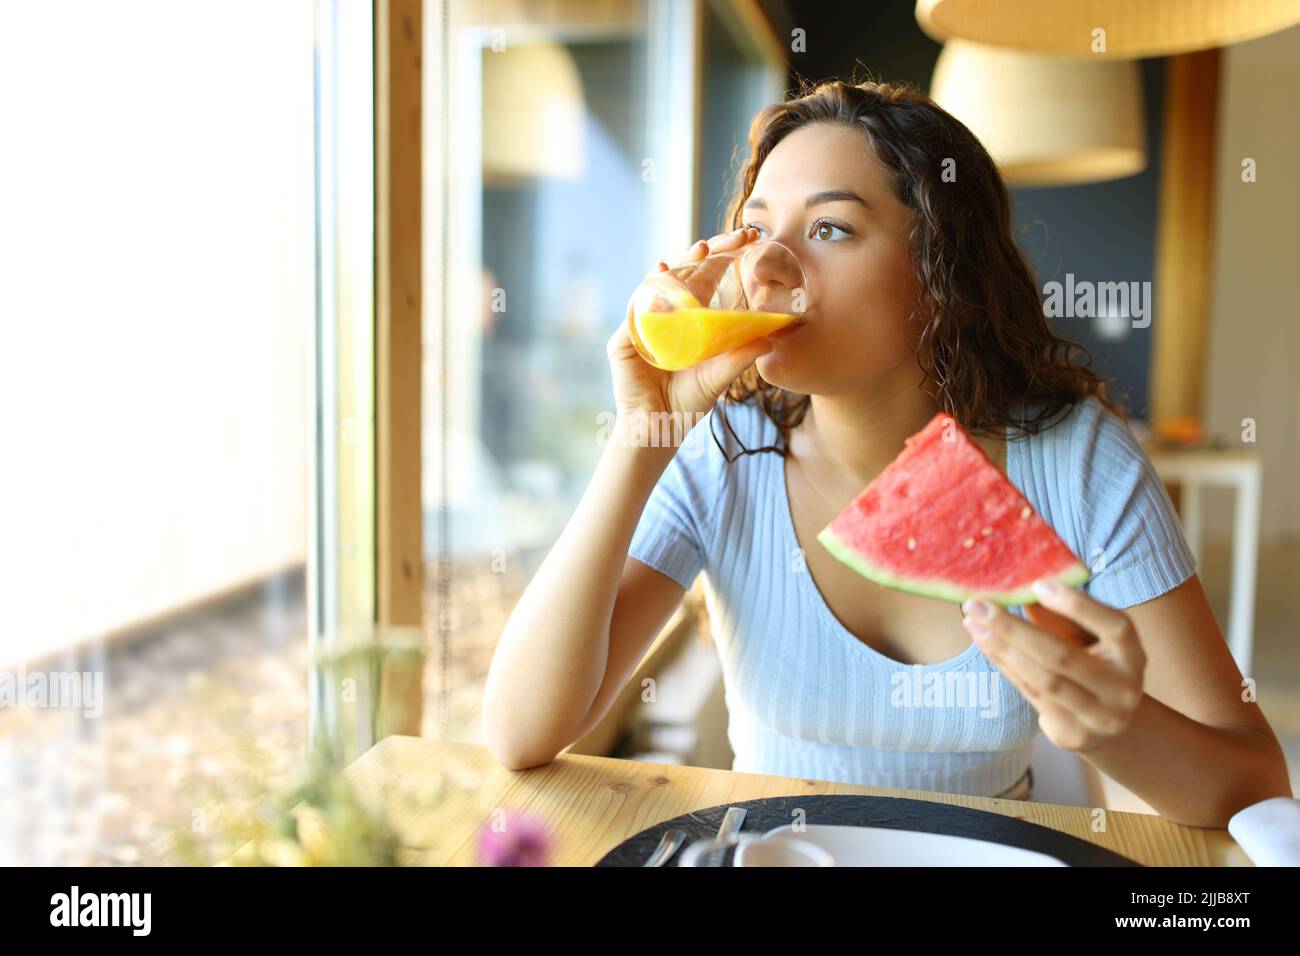 Woman drinking orange juice and eating watermelon in a restaurant interior Stock Photo